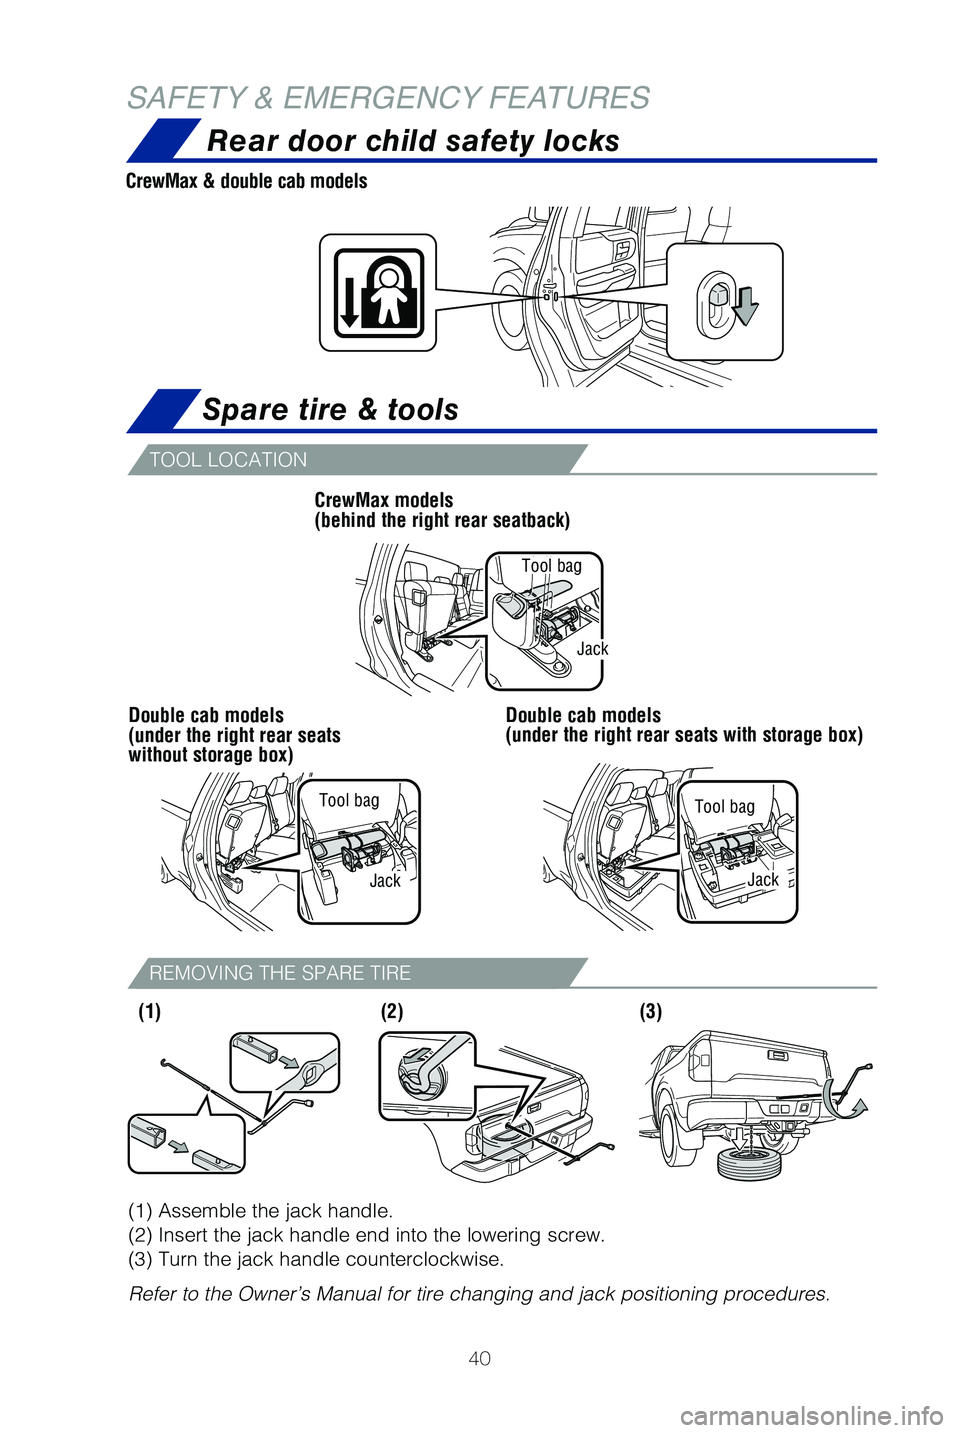 TOYOTA TUNDRA 2019   (in English) Service Manual 40
Spare tire & tools
TOOL LOCATION
REMOVING THE SPARE TIRE
Rear door child safety locks
(1) Assemble the jack handle.
(2) Insert the jack handle end into the lowering screw.
(3) Turn the jack handle 